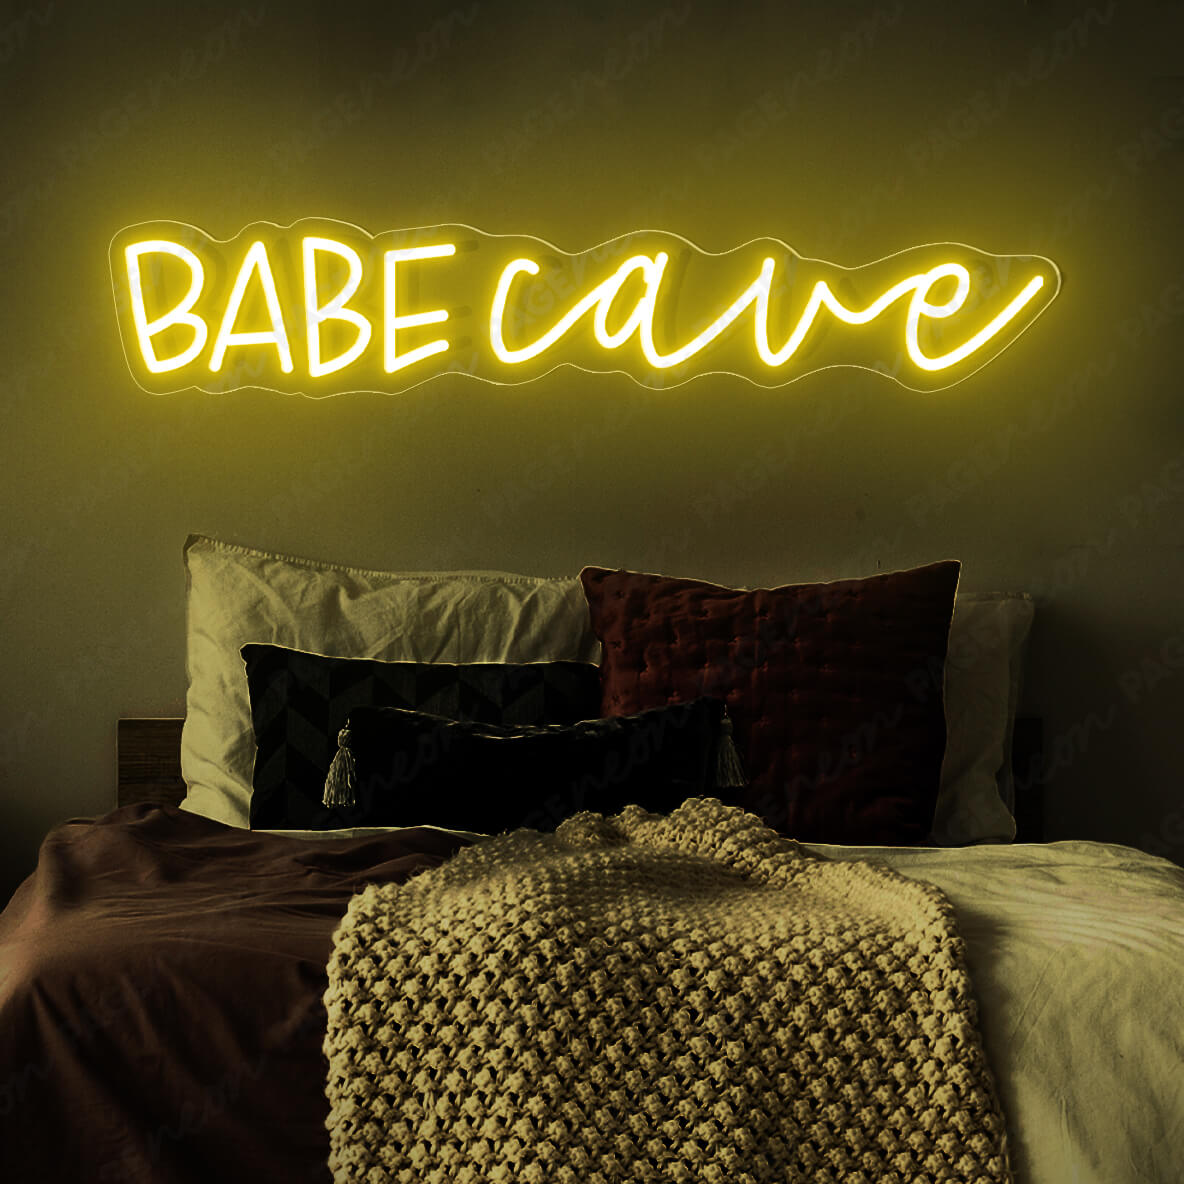 Babe Cave Neon Sign Led Light Yellow